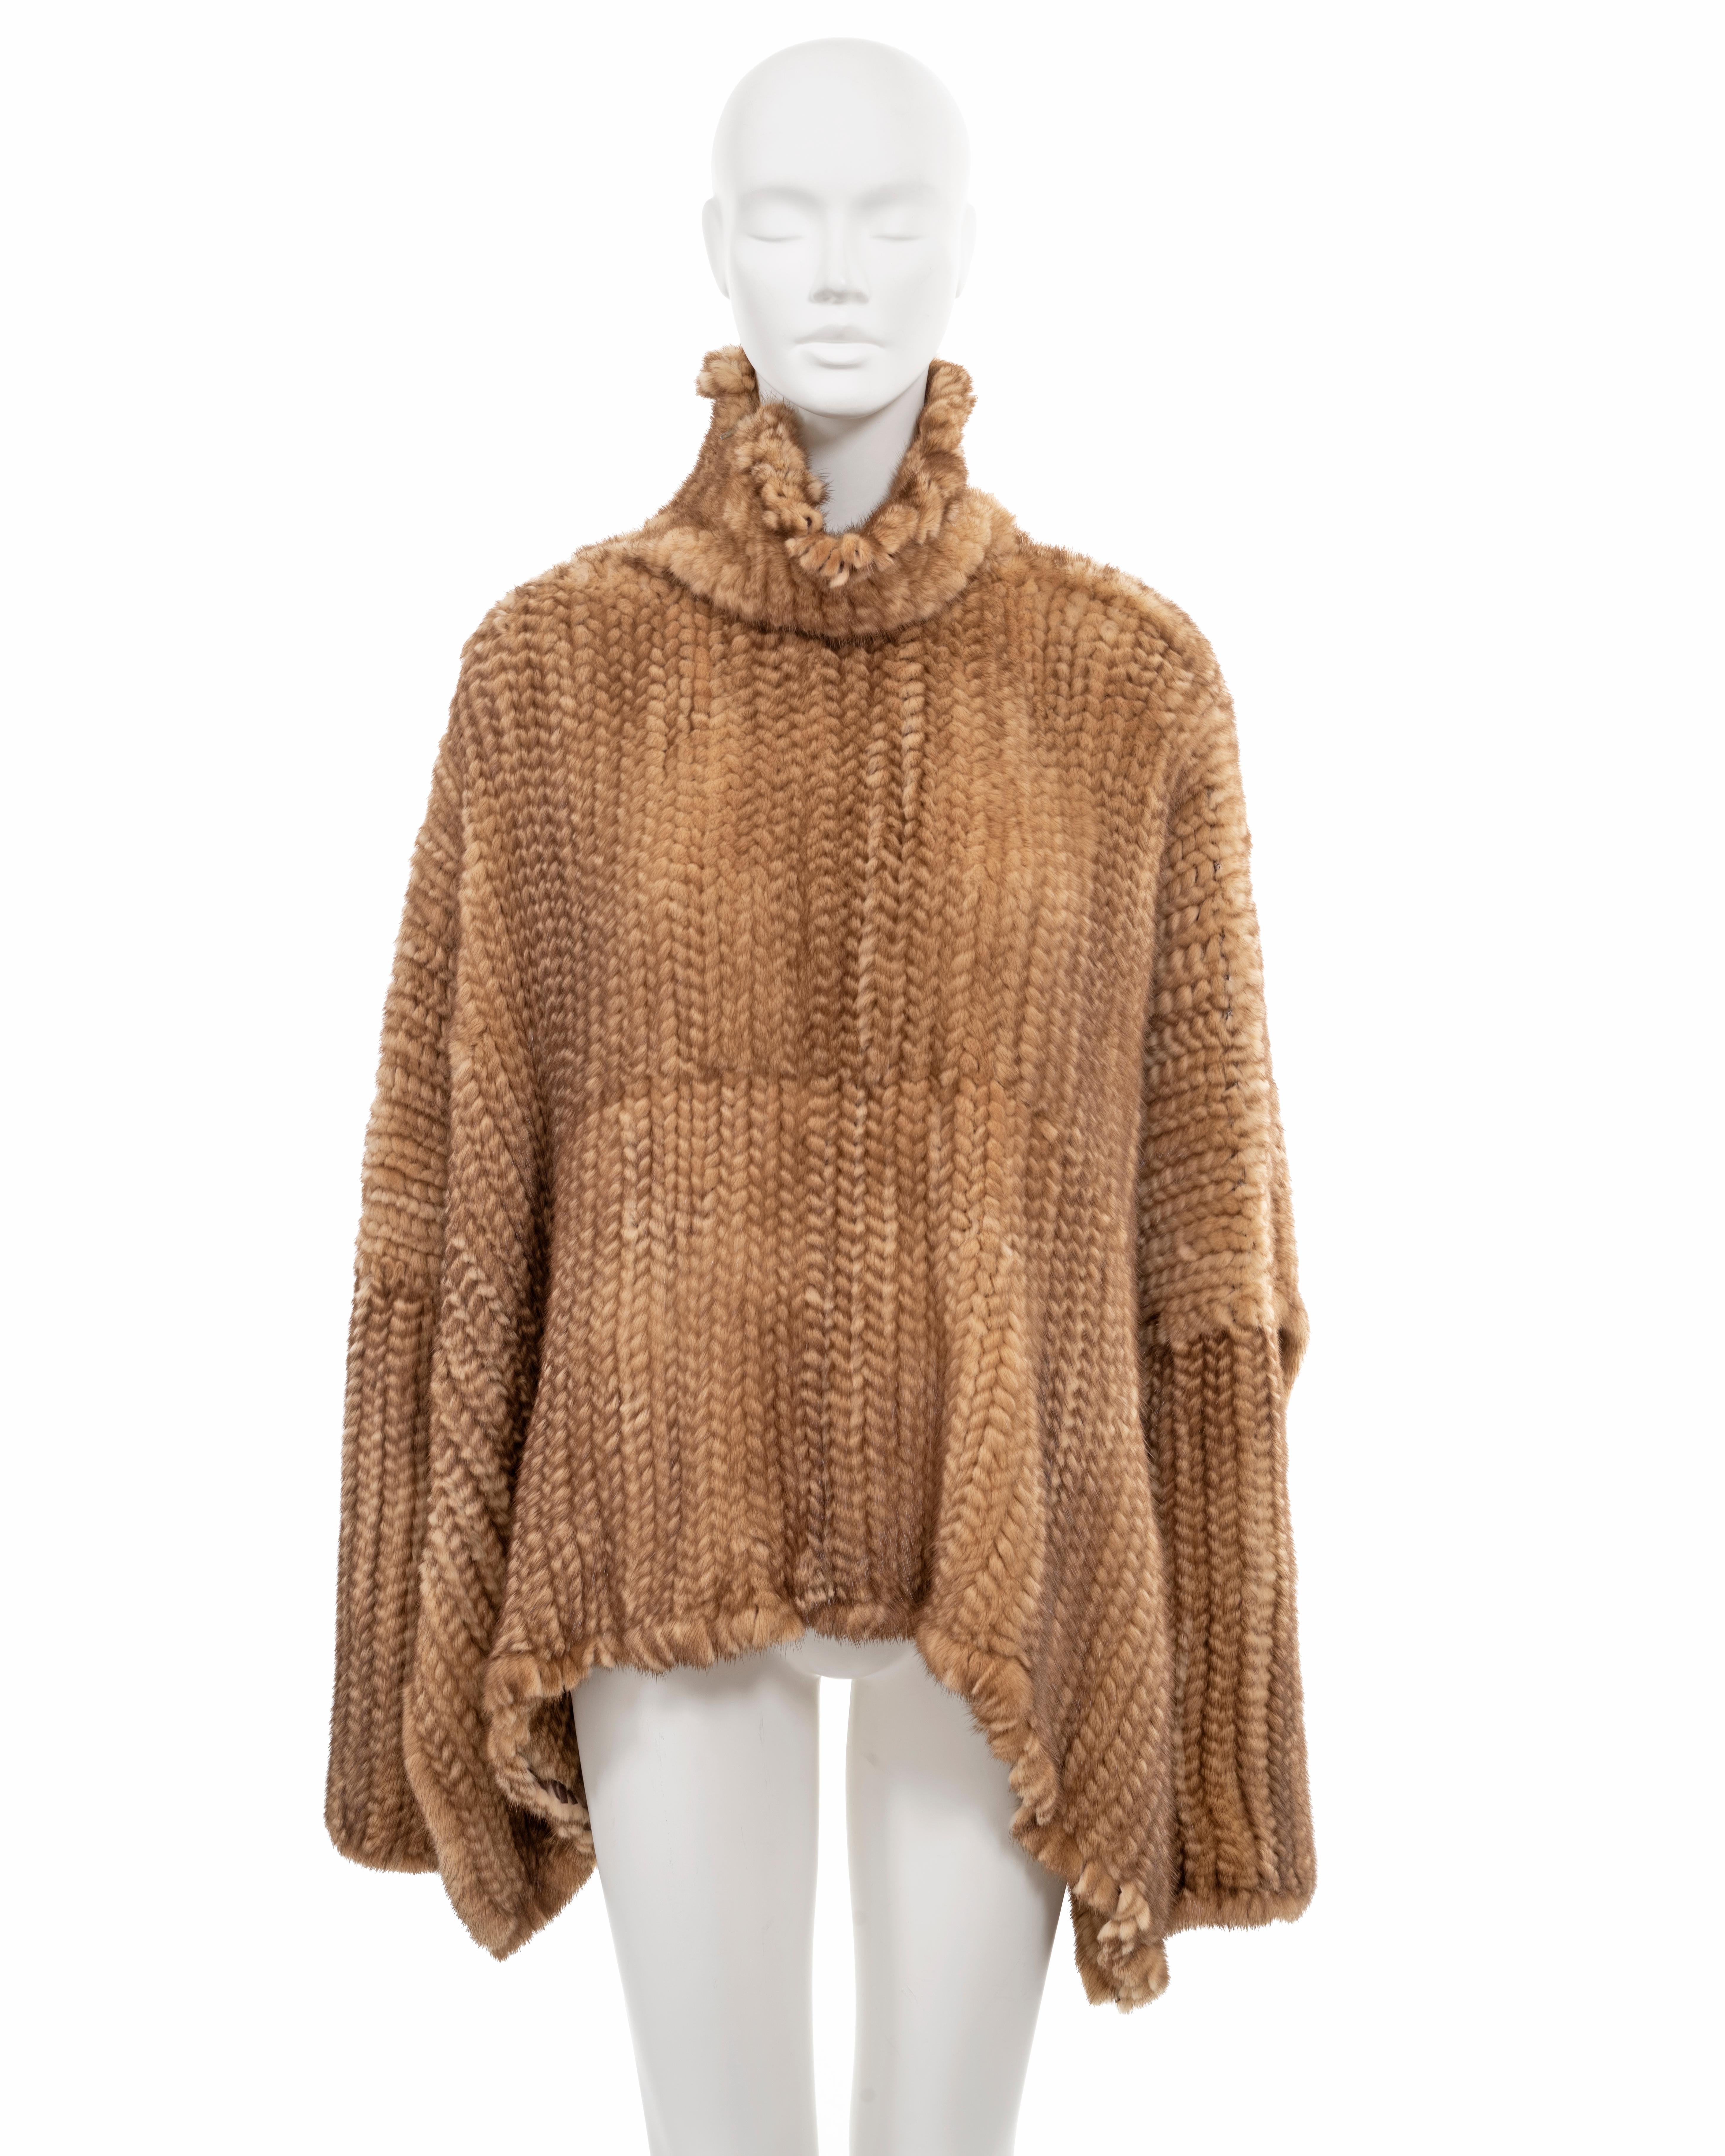 ▪ Christian Dior fur sweater
▪ Creative Director: John Galliano
▪ Sold by One of a Kind Archive
▪ Fall-Winter 2000
▪ Constructed from knitted mink fur ribbons 
▪ Fringed trim 
▪ Wide cut 
▪ Oversized fit 
▪ High-low hemline 
▪ One Size
▪ Made in